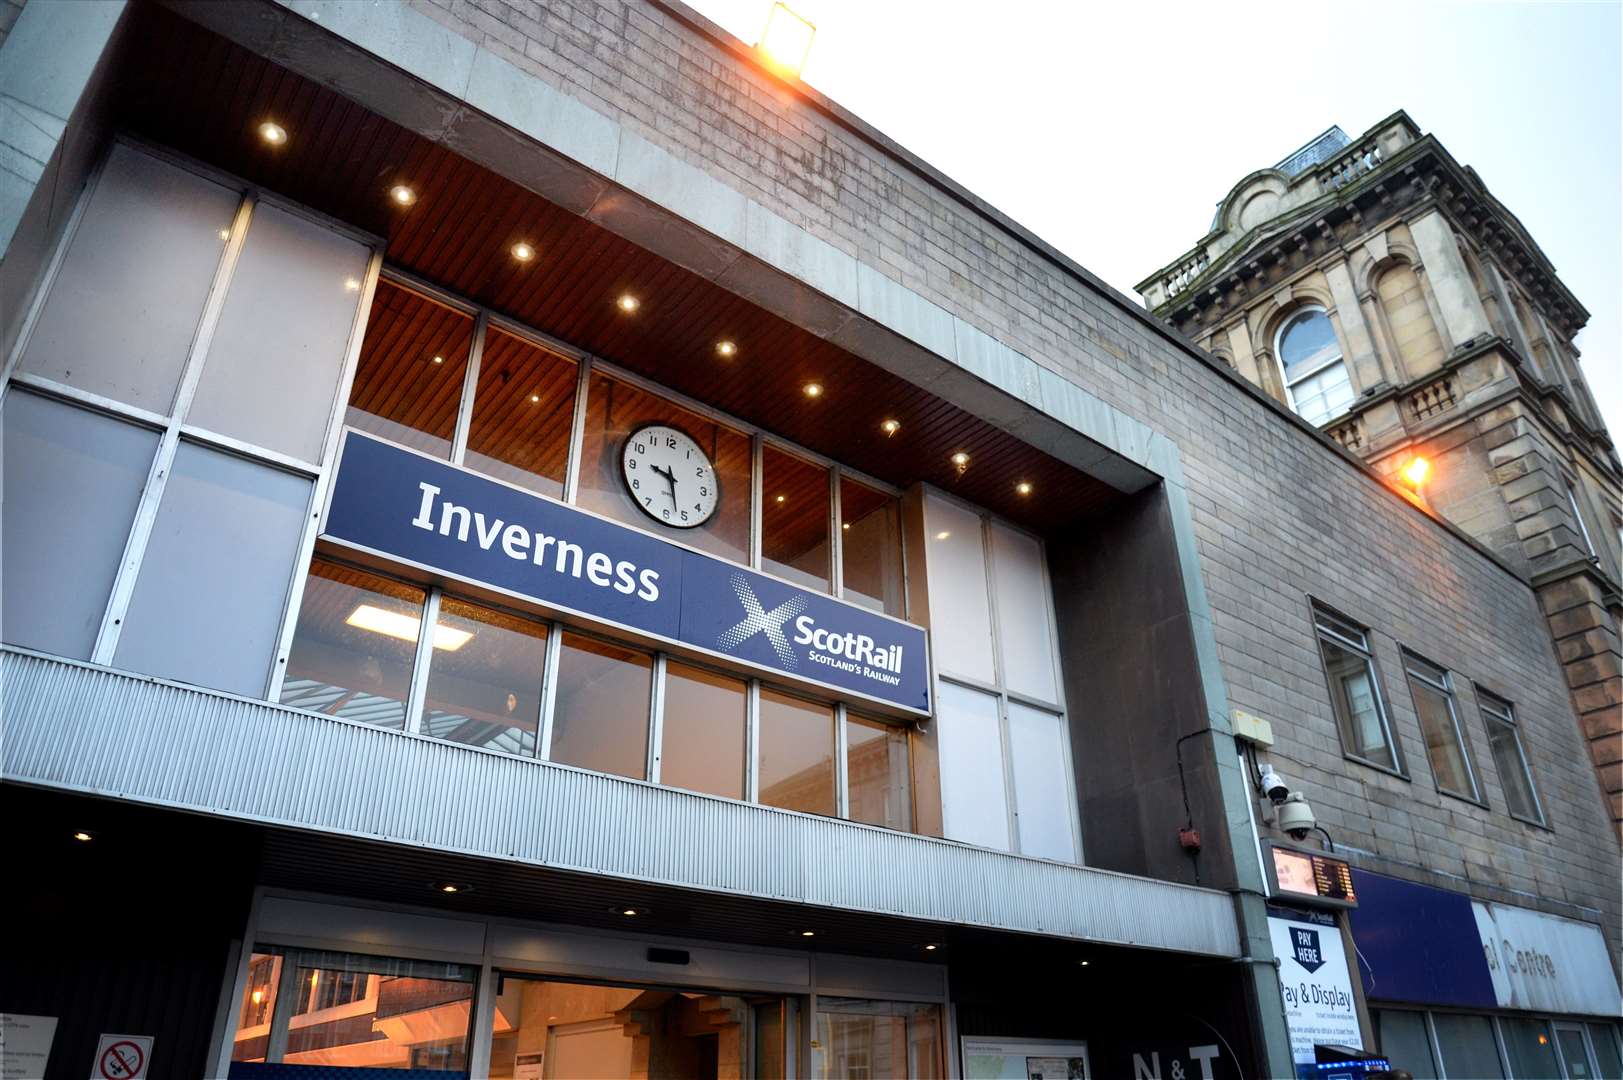 The passengers were driven to Inverness from Wick – costing ScotRail almost £800.